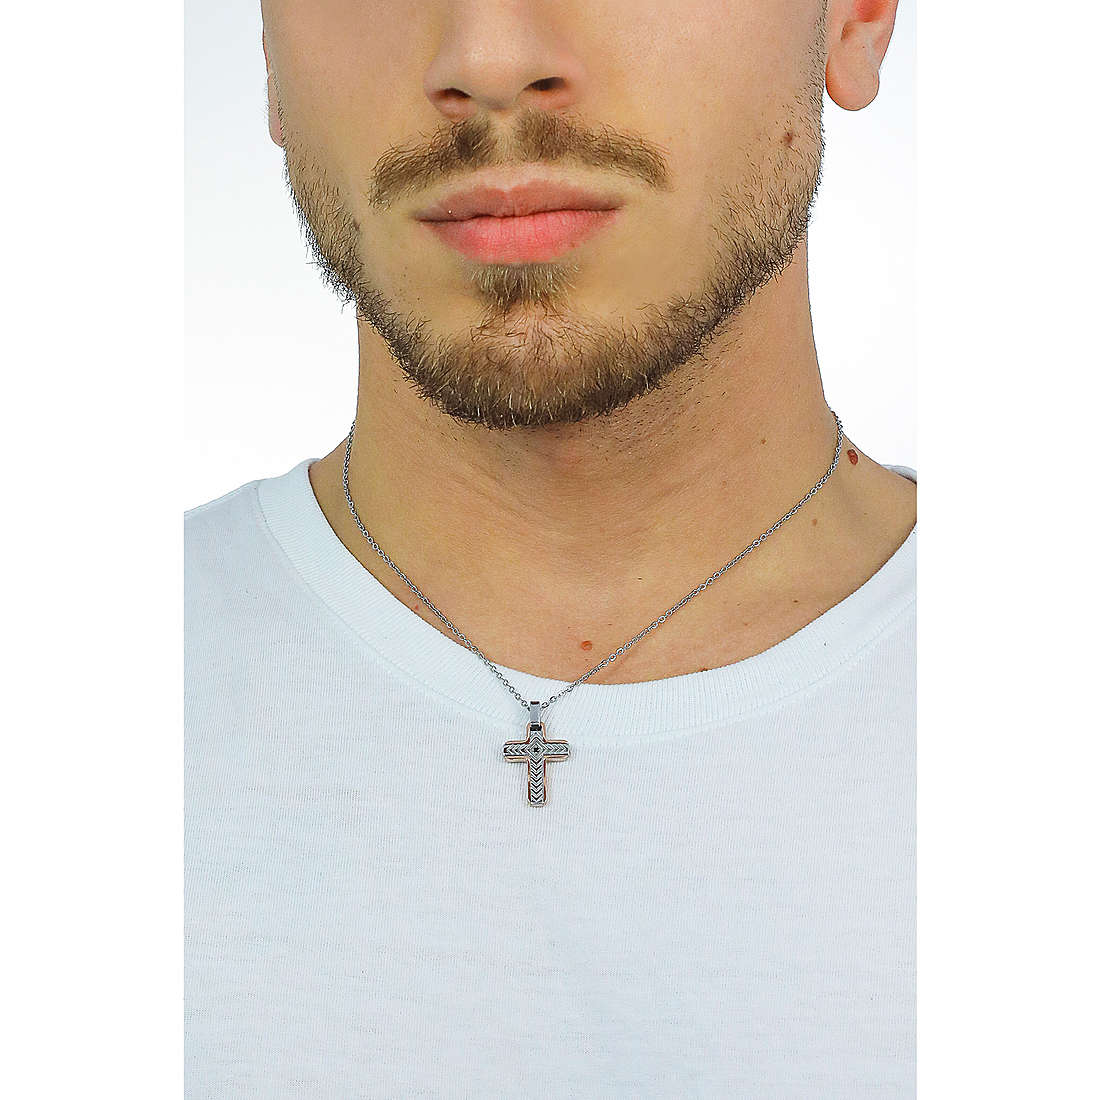 Sovrani necklaces Infinity Collection man J5864 wearing